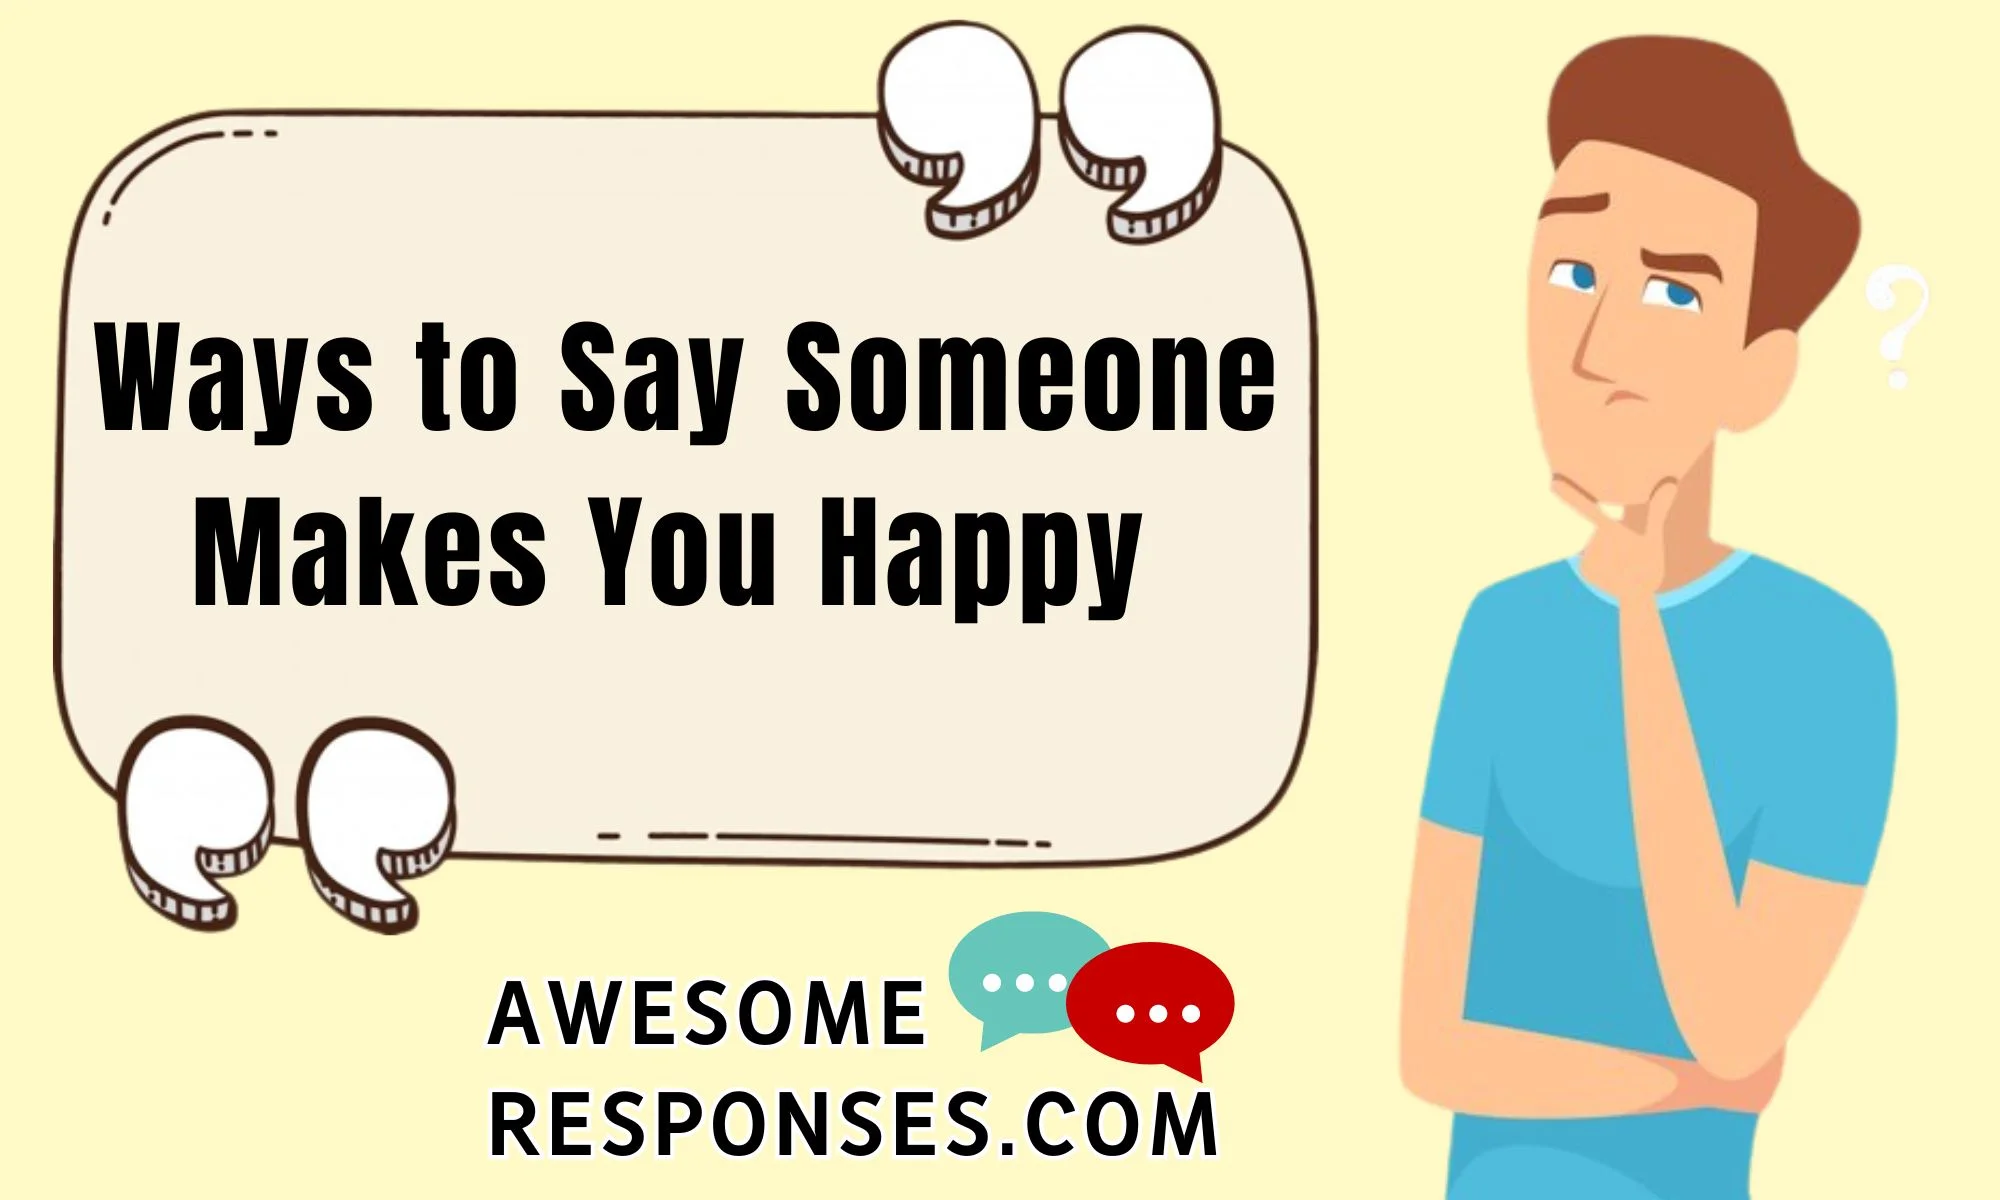 Ways to Say Someone Makes You Happy